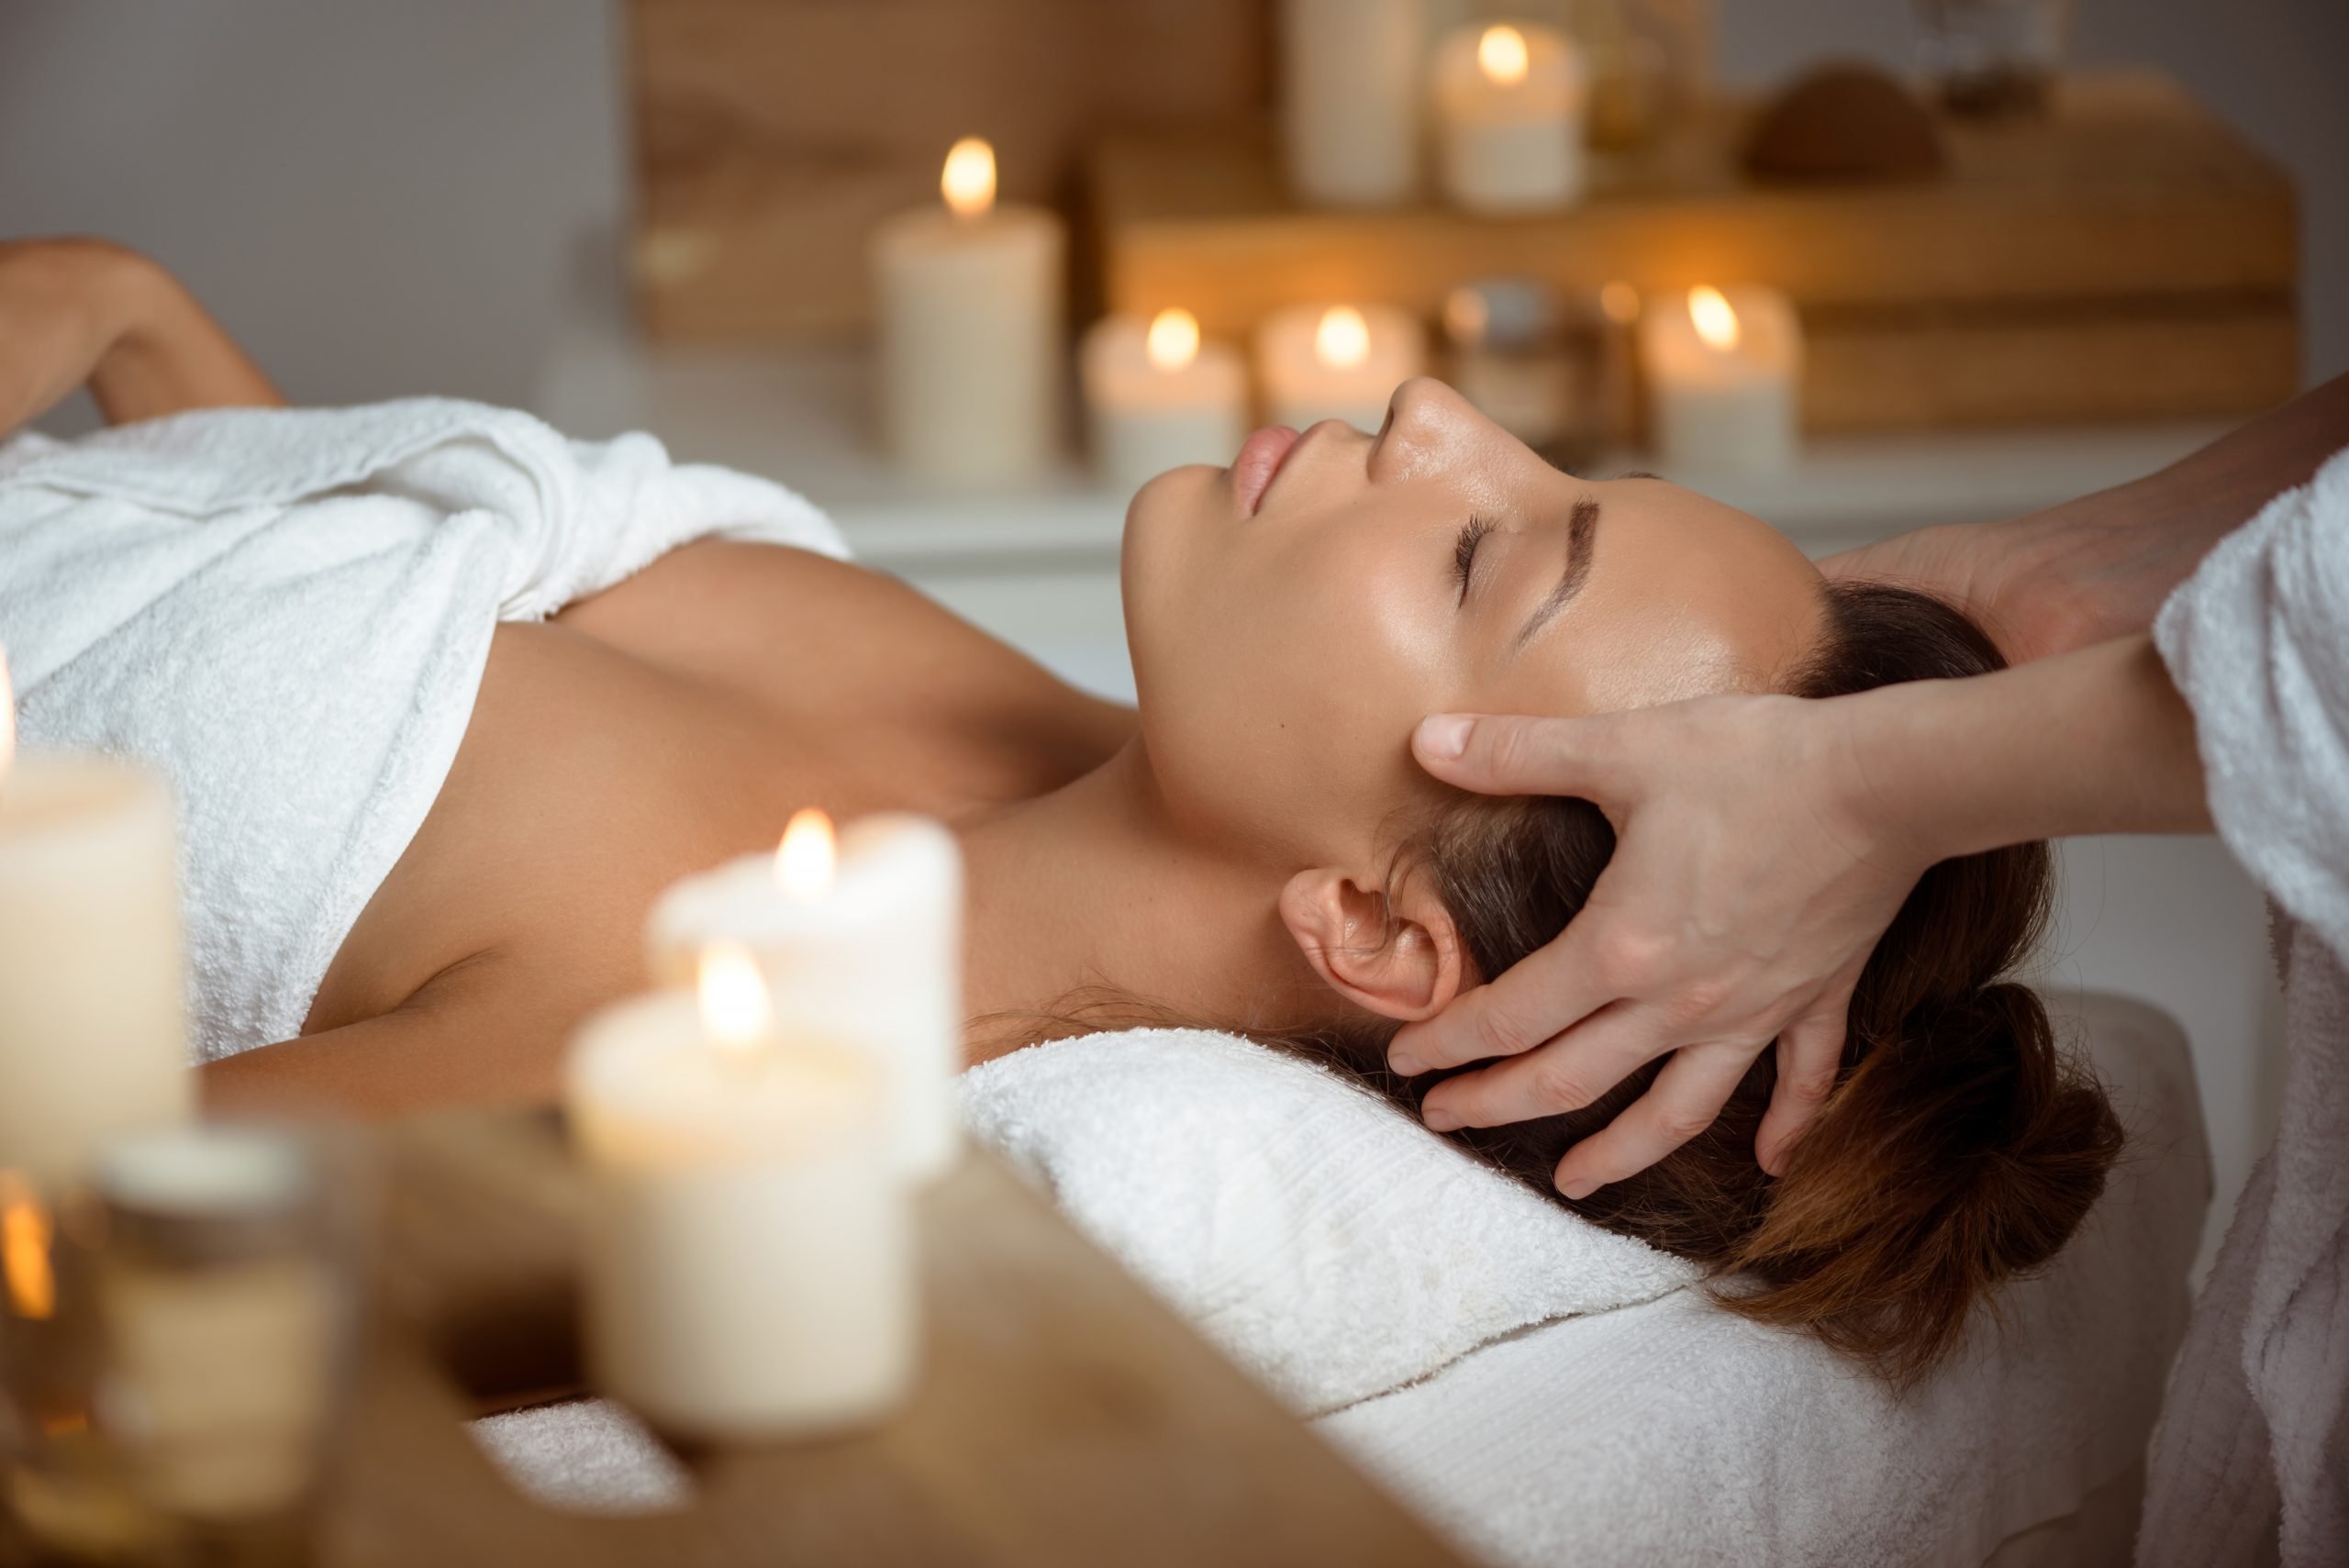 “Soothing Souls: Finding Harmony and Relaxation Together on Spa Days”